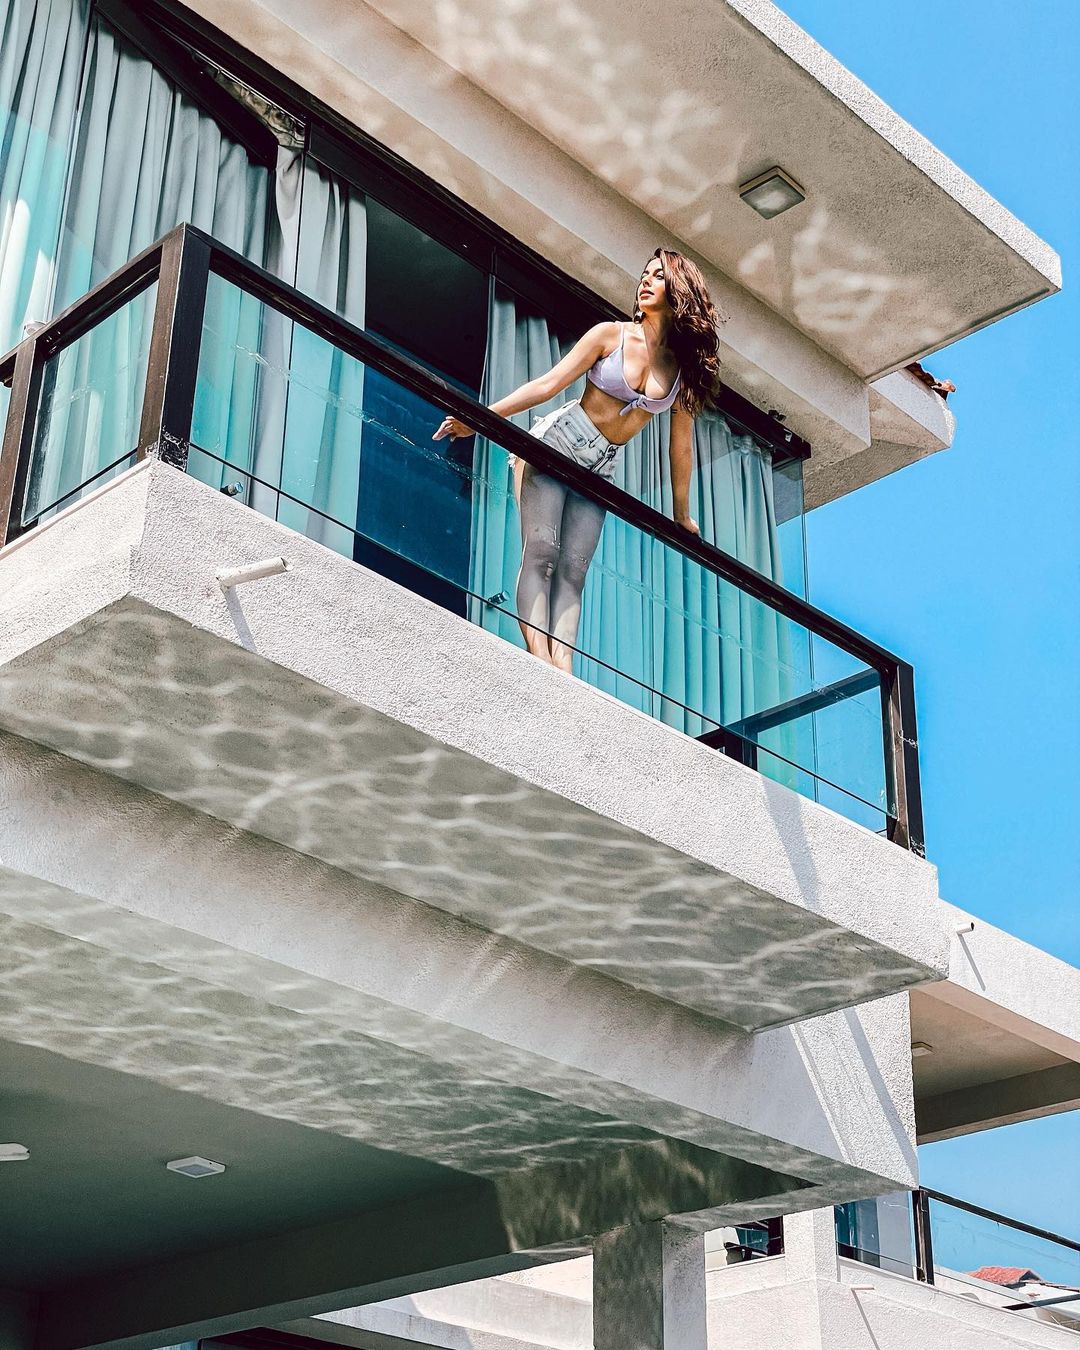 Alaya F shows off her cleavage as she leans on a balcony in a sexy blouse paired with denim shorts